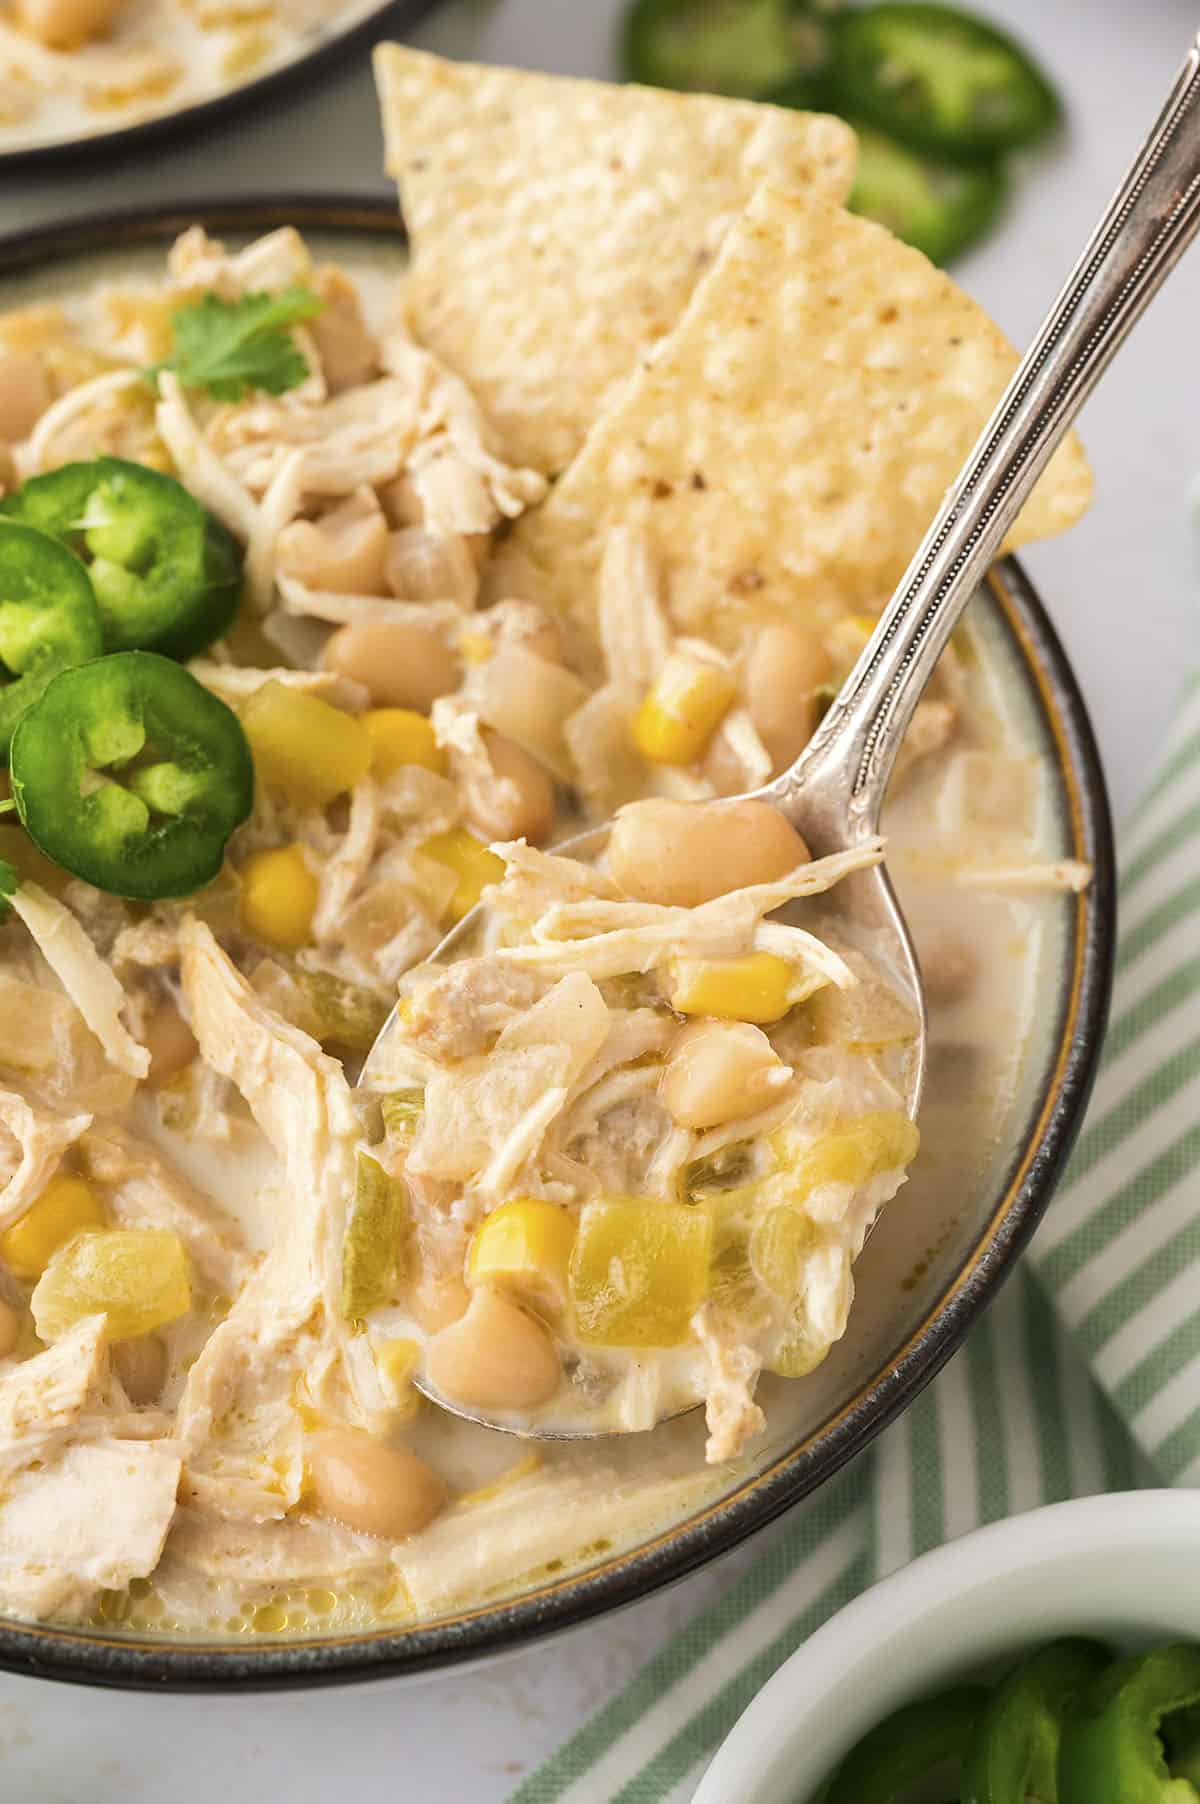 Bowl of slow cooker white chicken chili.